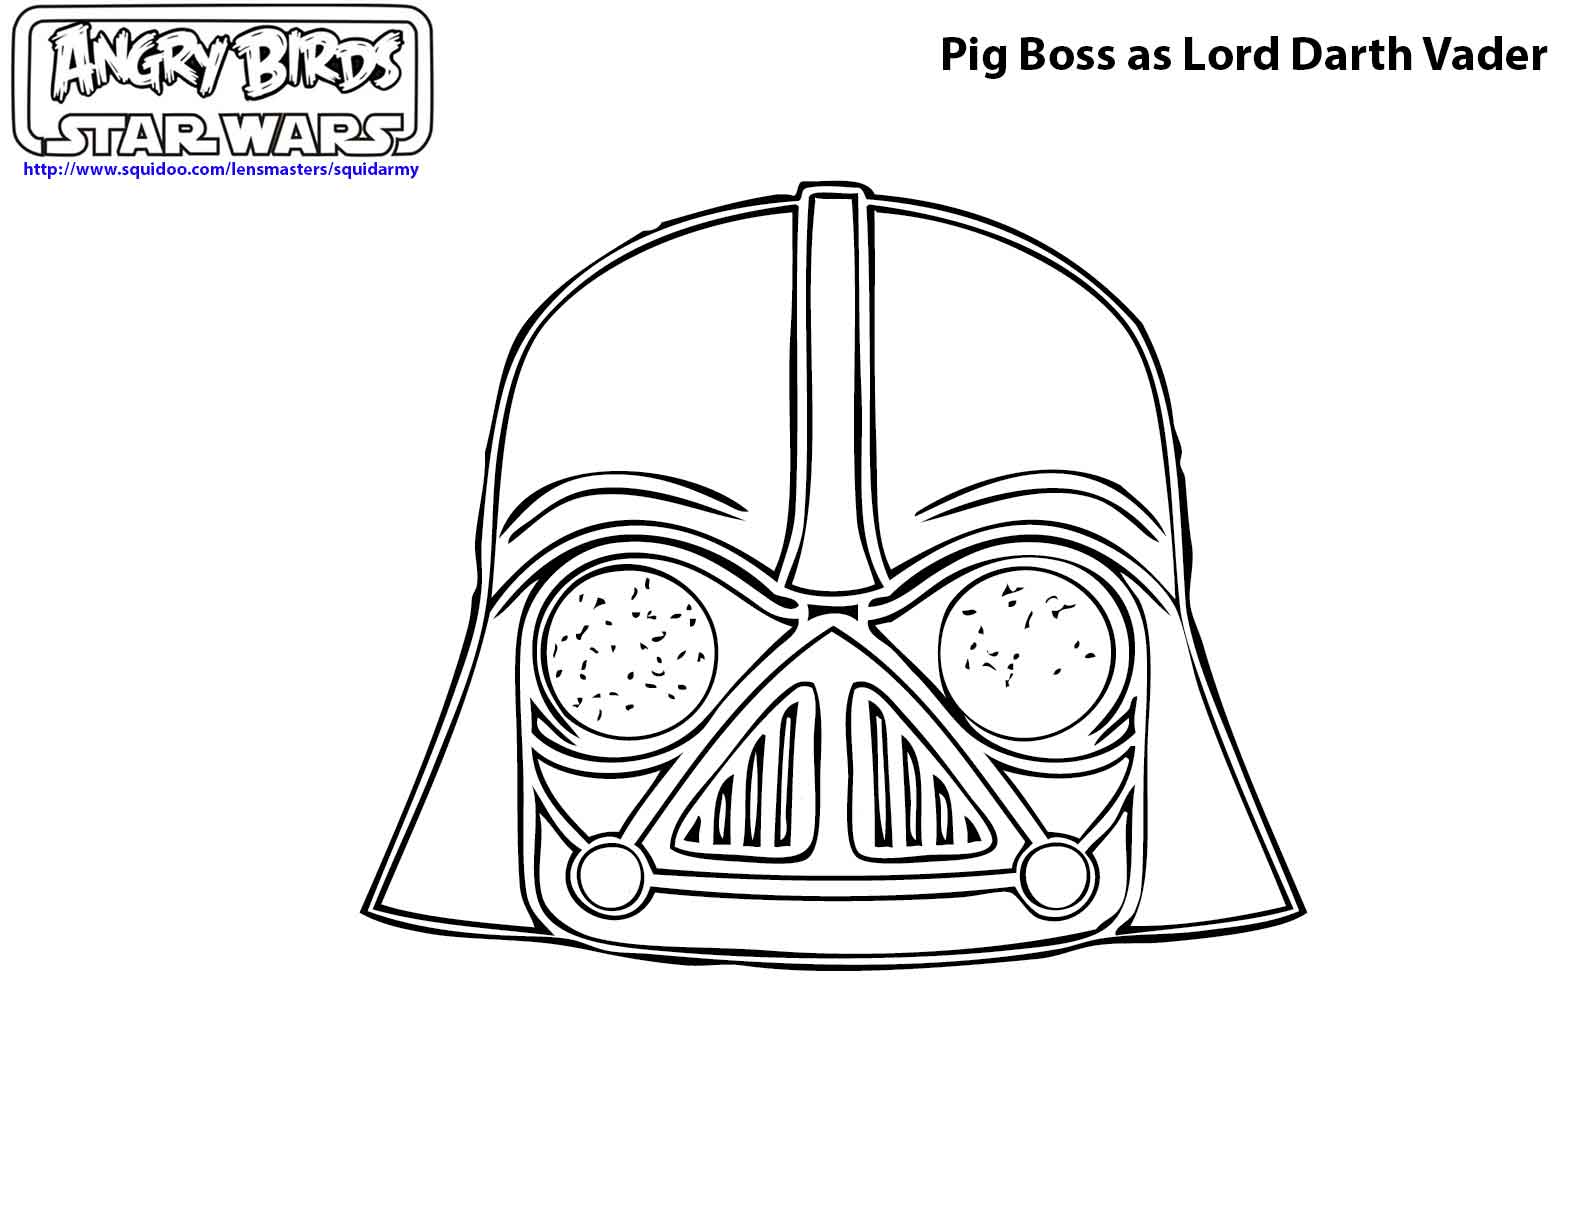 angry birds star wars coloring pages Pig Boss